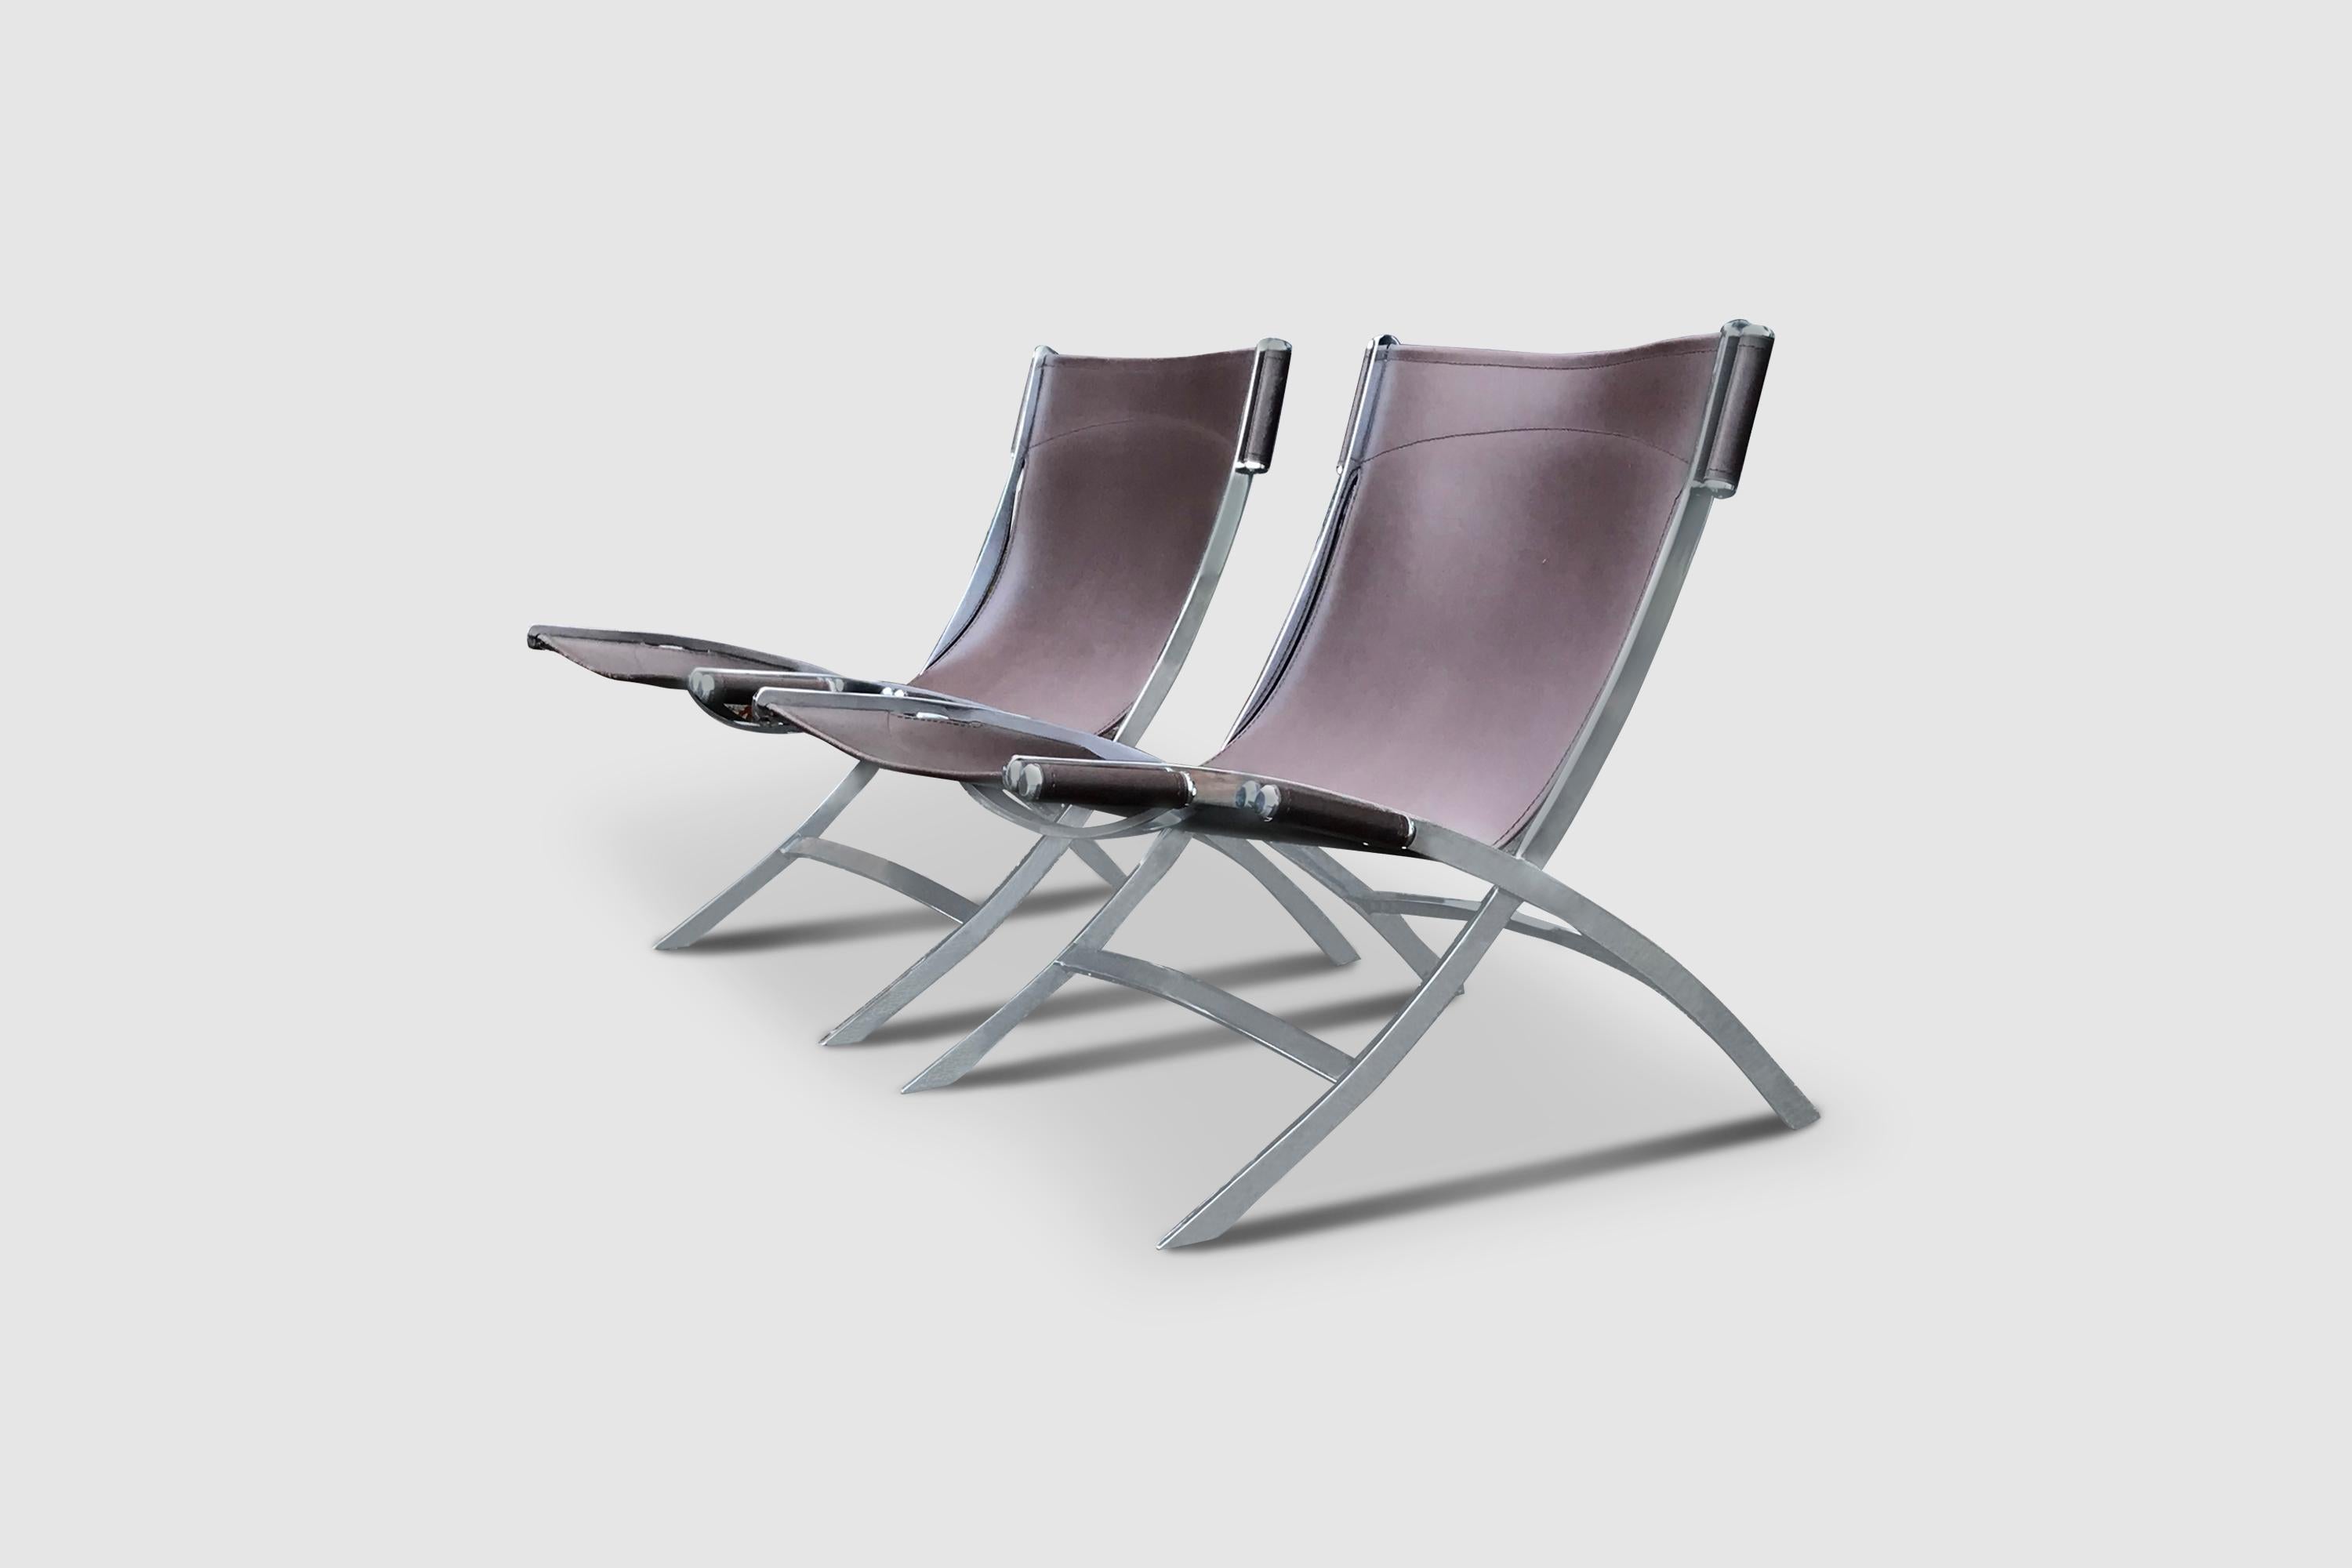 A scissor lounge chair, widely attributed to designers Paul Tuttle and Antonio Citterio for Flexform Italy.

The frame consists of one piece of solid chromed steel. The leather patch is fixed to the frame on 6 points by chrome cylinder shaped